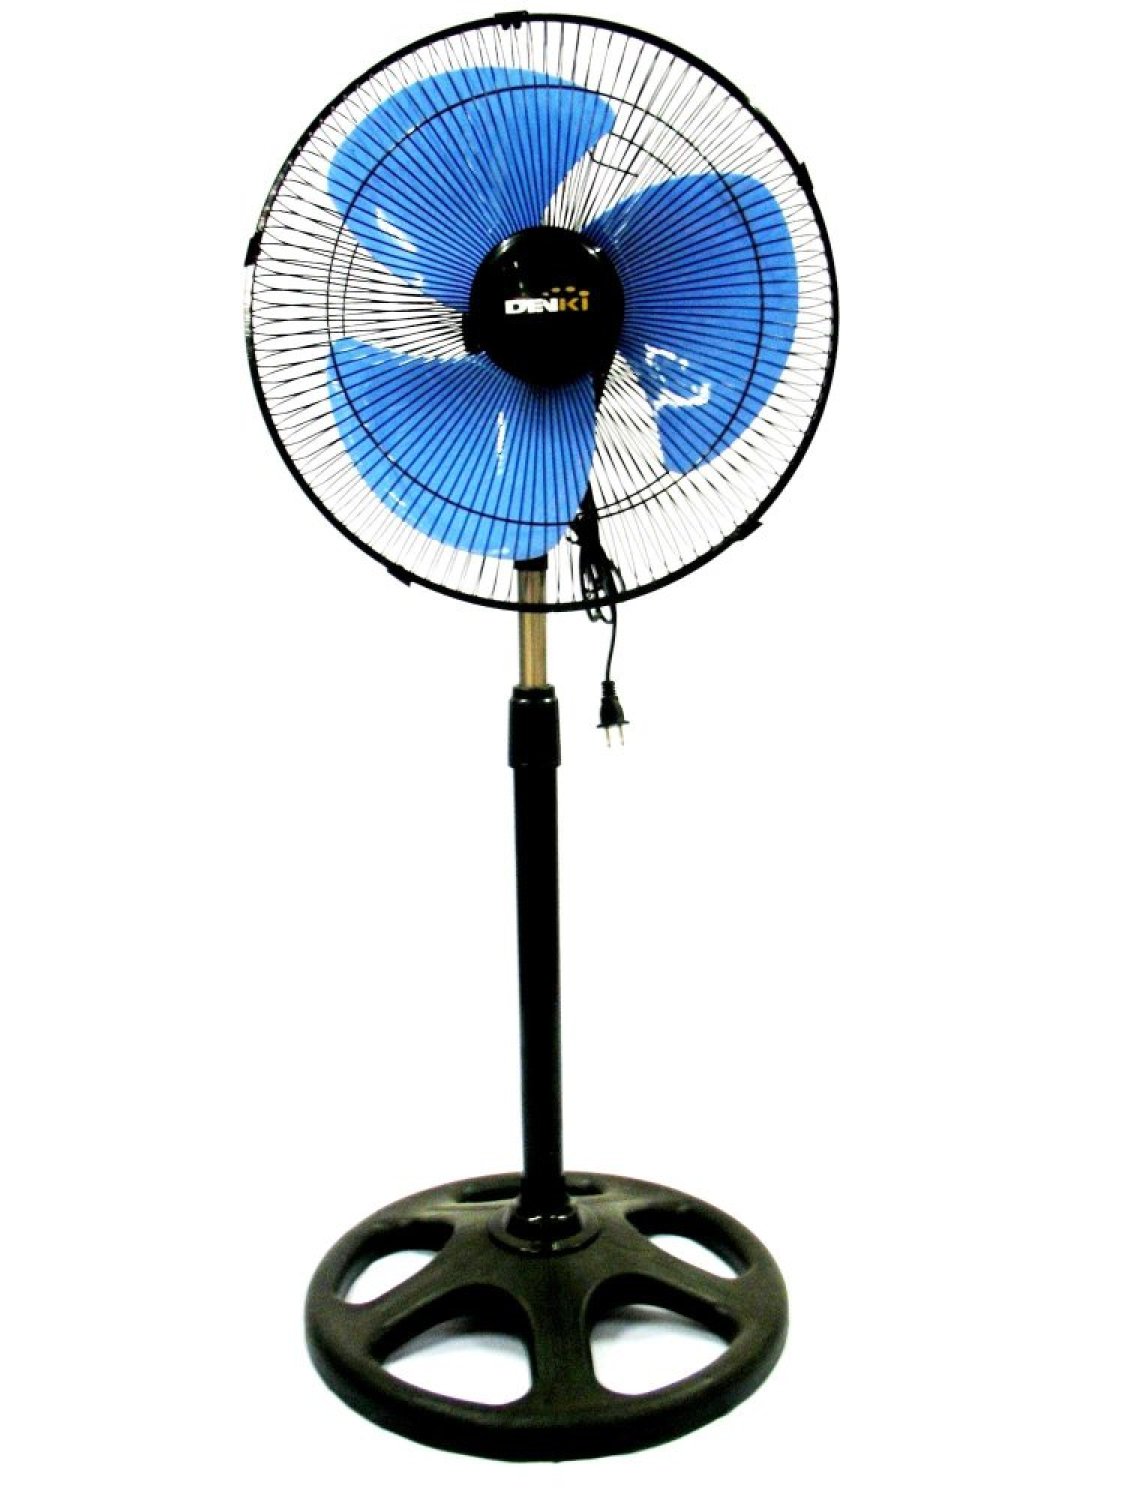 Denki 16 Stand Fan Blue Review And Price